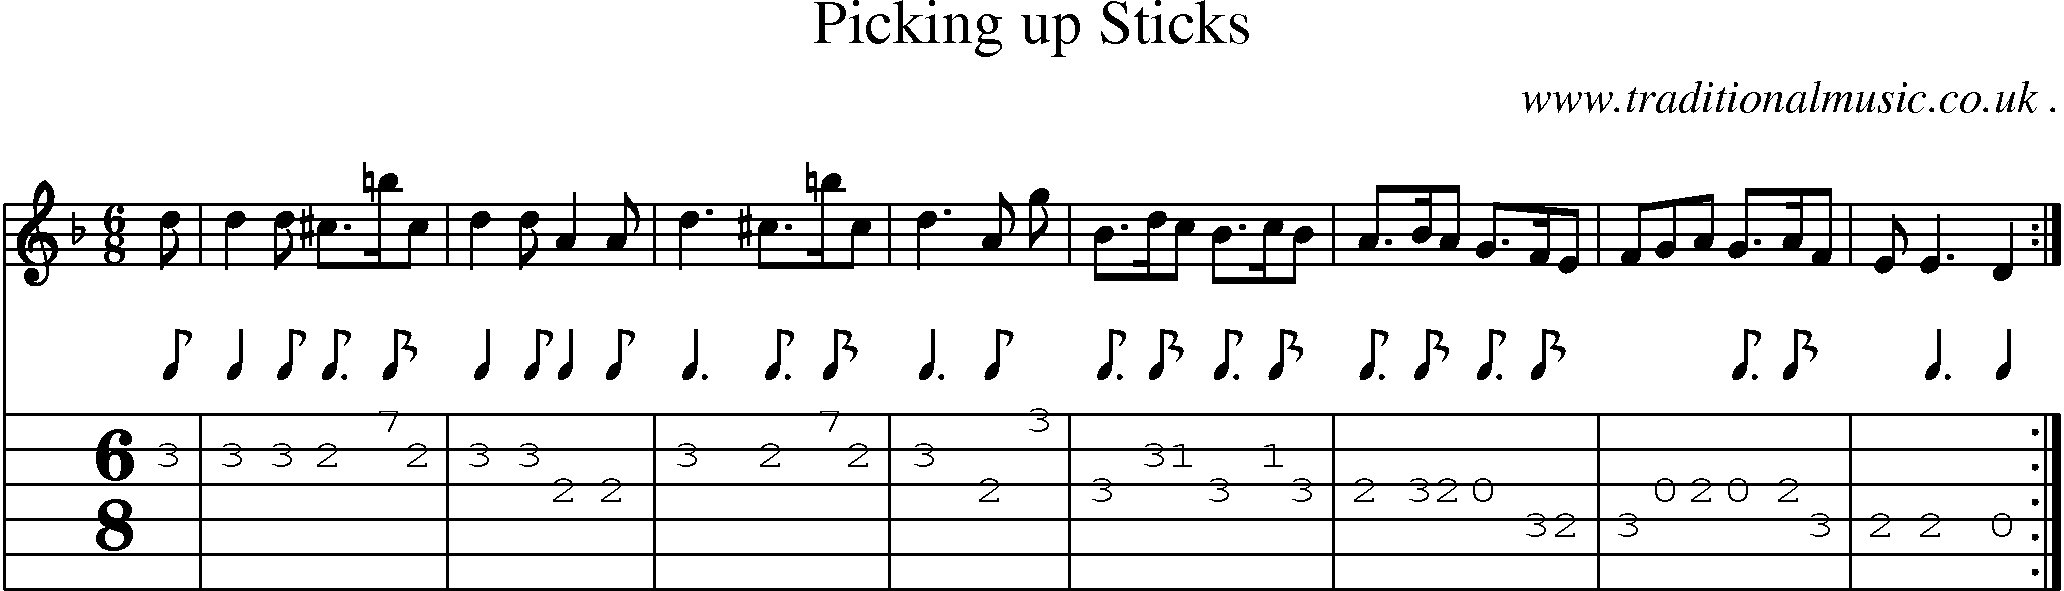 Sheet-Music and Guitar Tabs for Picking Up Sticks